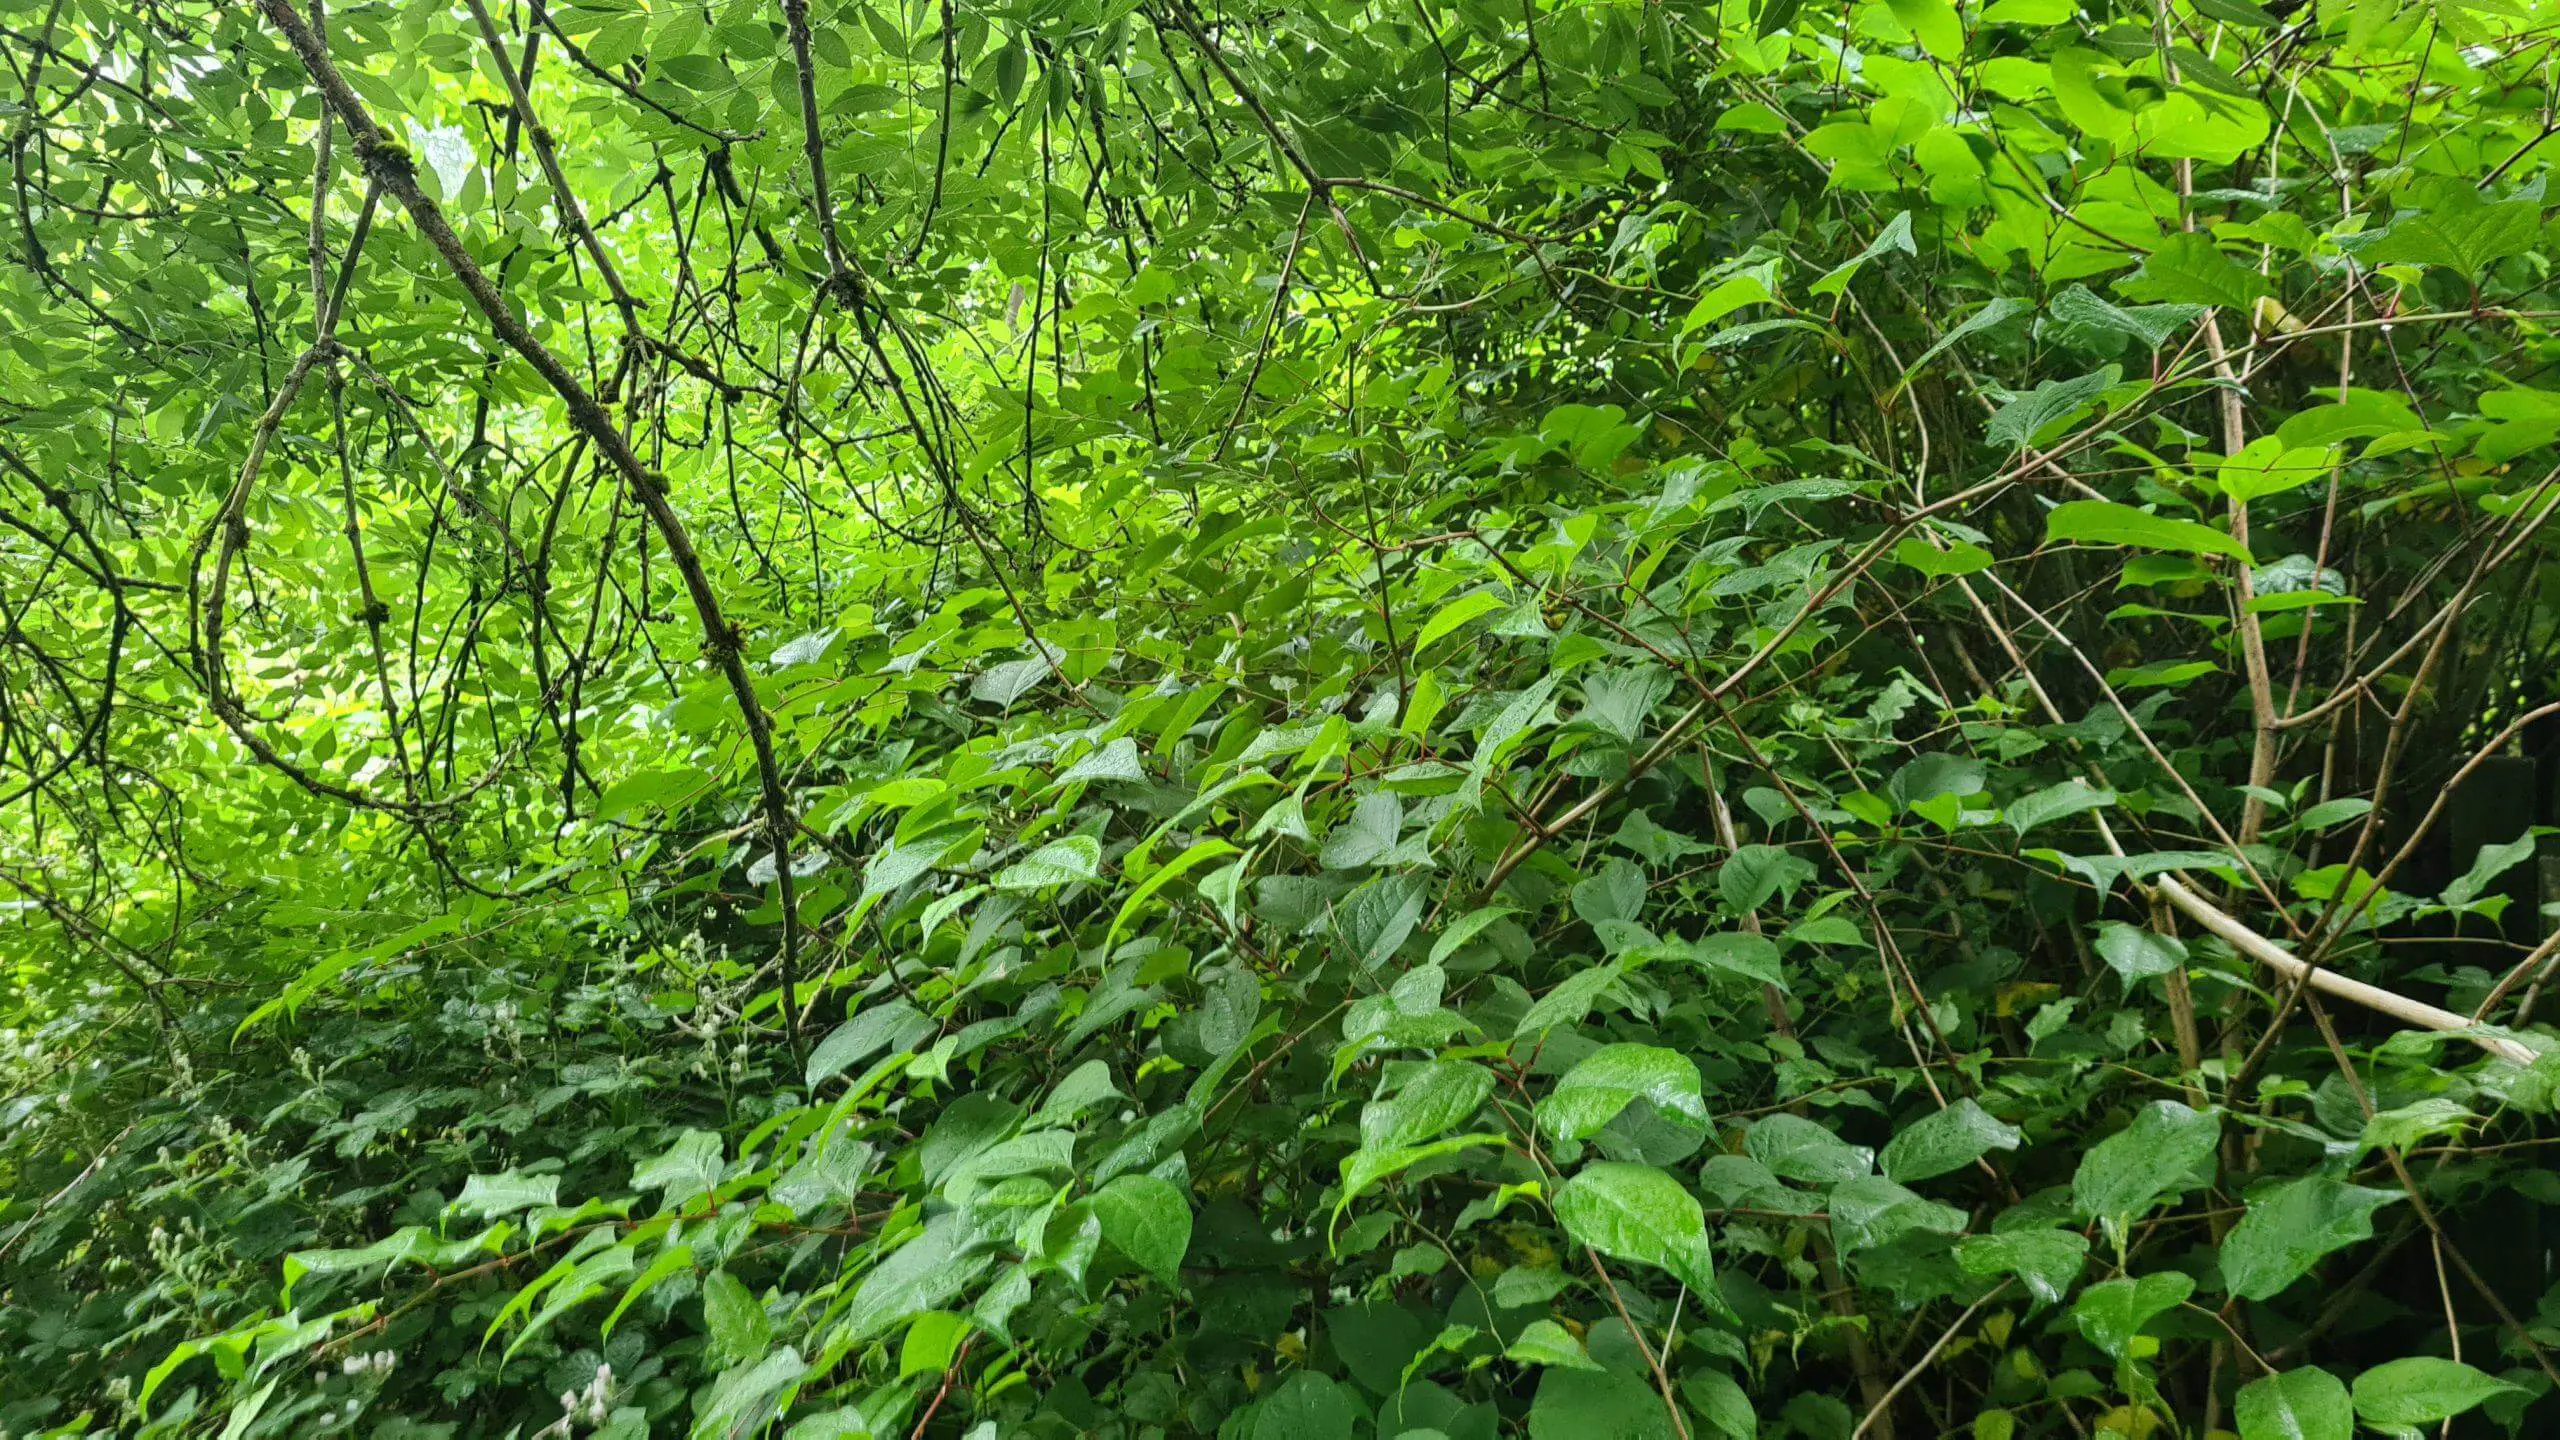 The latest Japanese Knotweed Study confirms how it does not devalue properties scaled